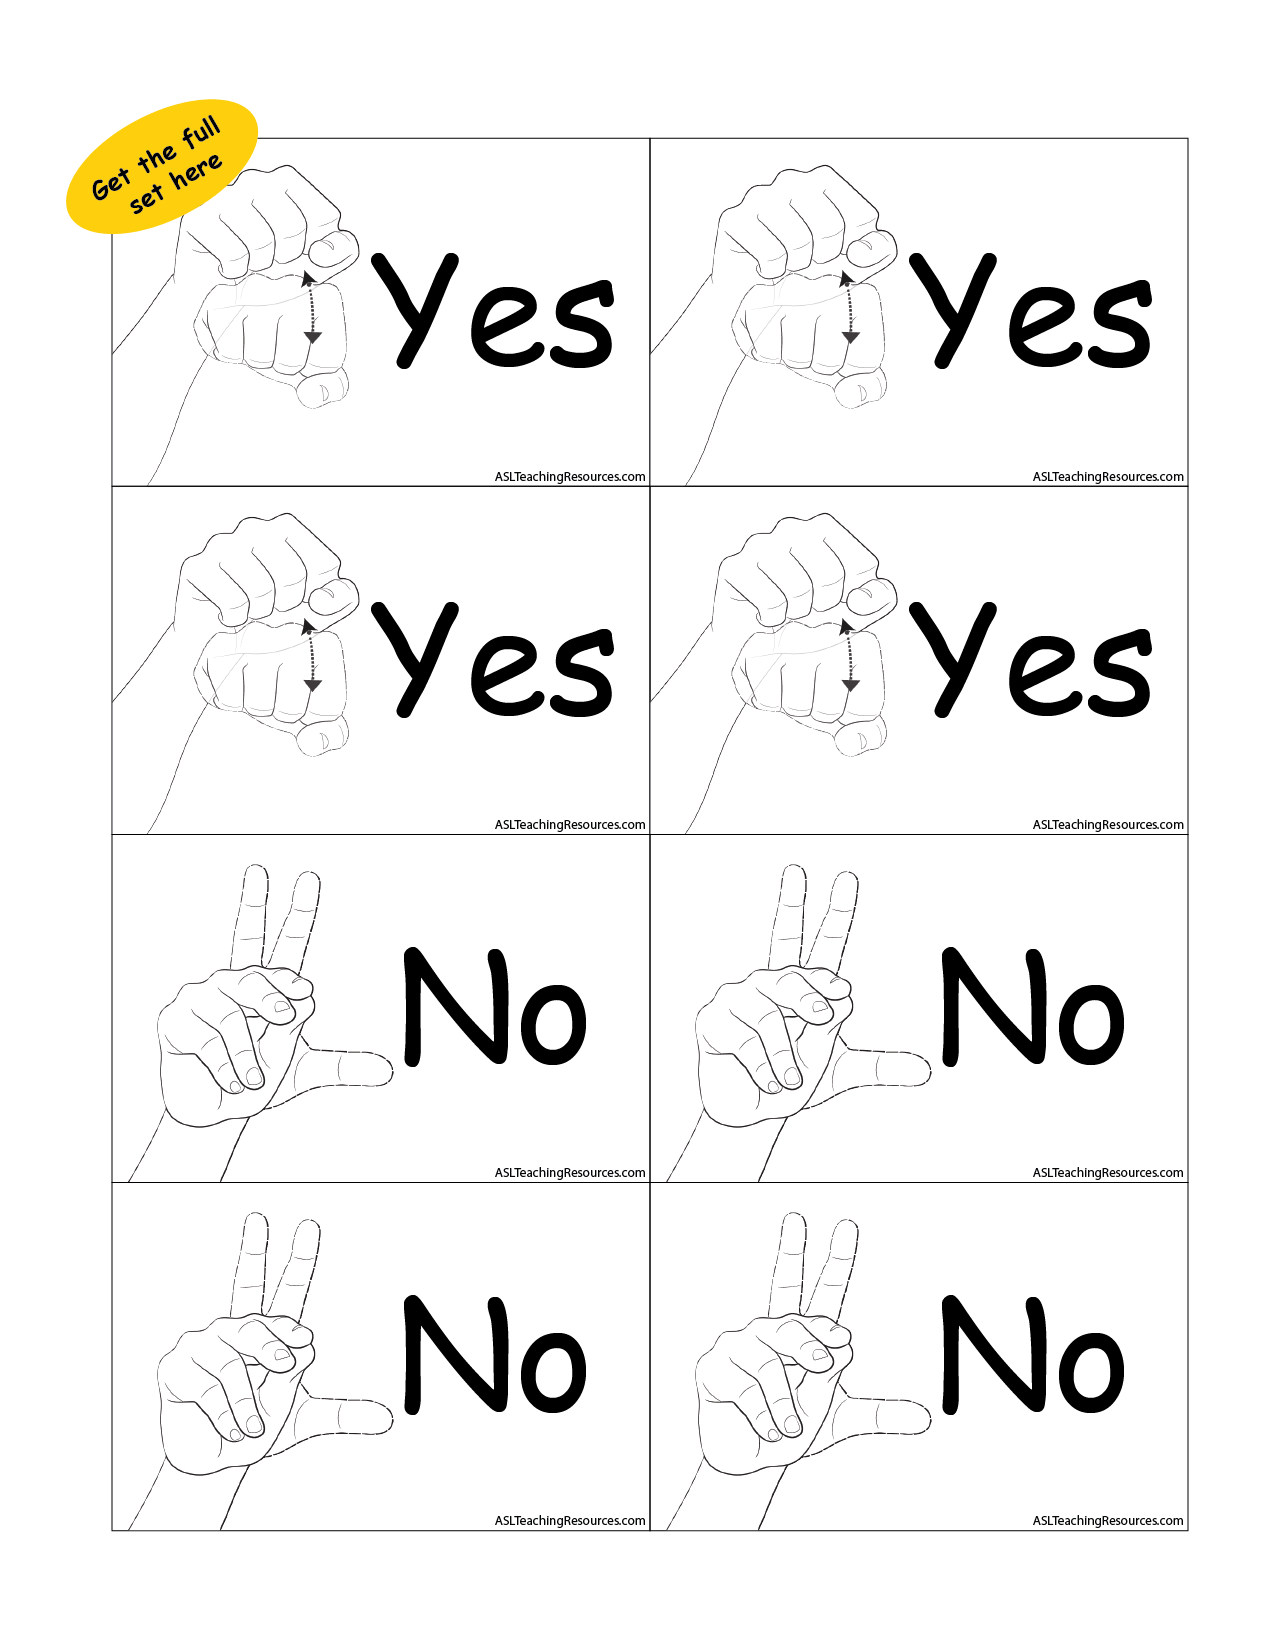 https://aslteachingresources.com/new/wp-content/uploads/2021/07/the-yes-or-no-game-questions-flashcards.png